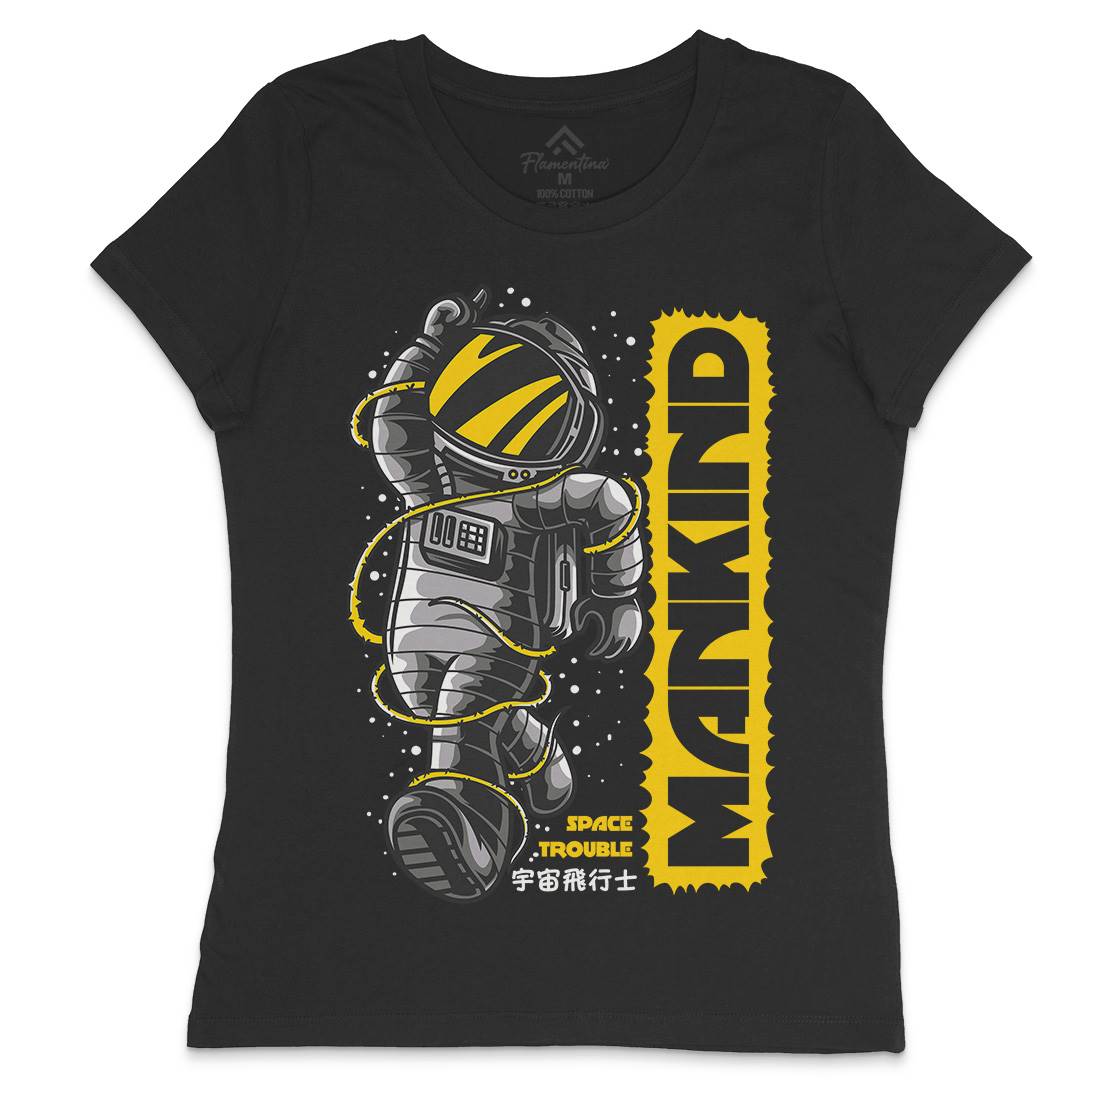 Mankind Womens Crew Neck T-Shirt Space D644